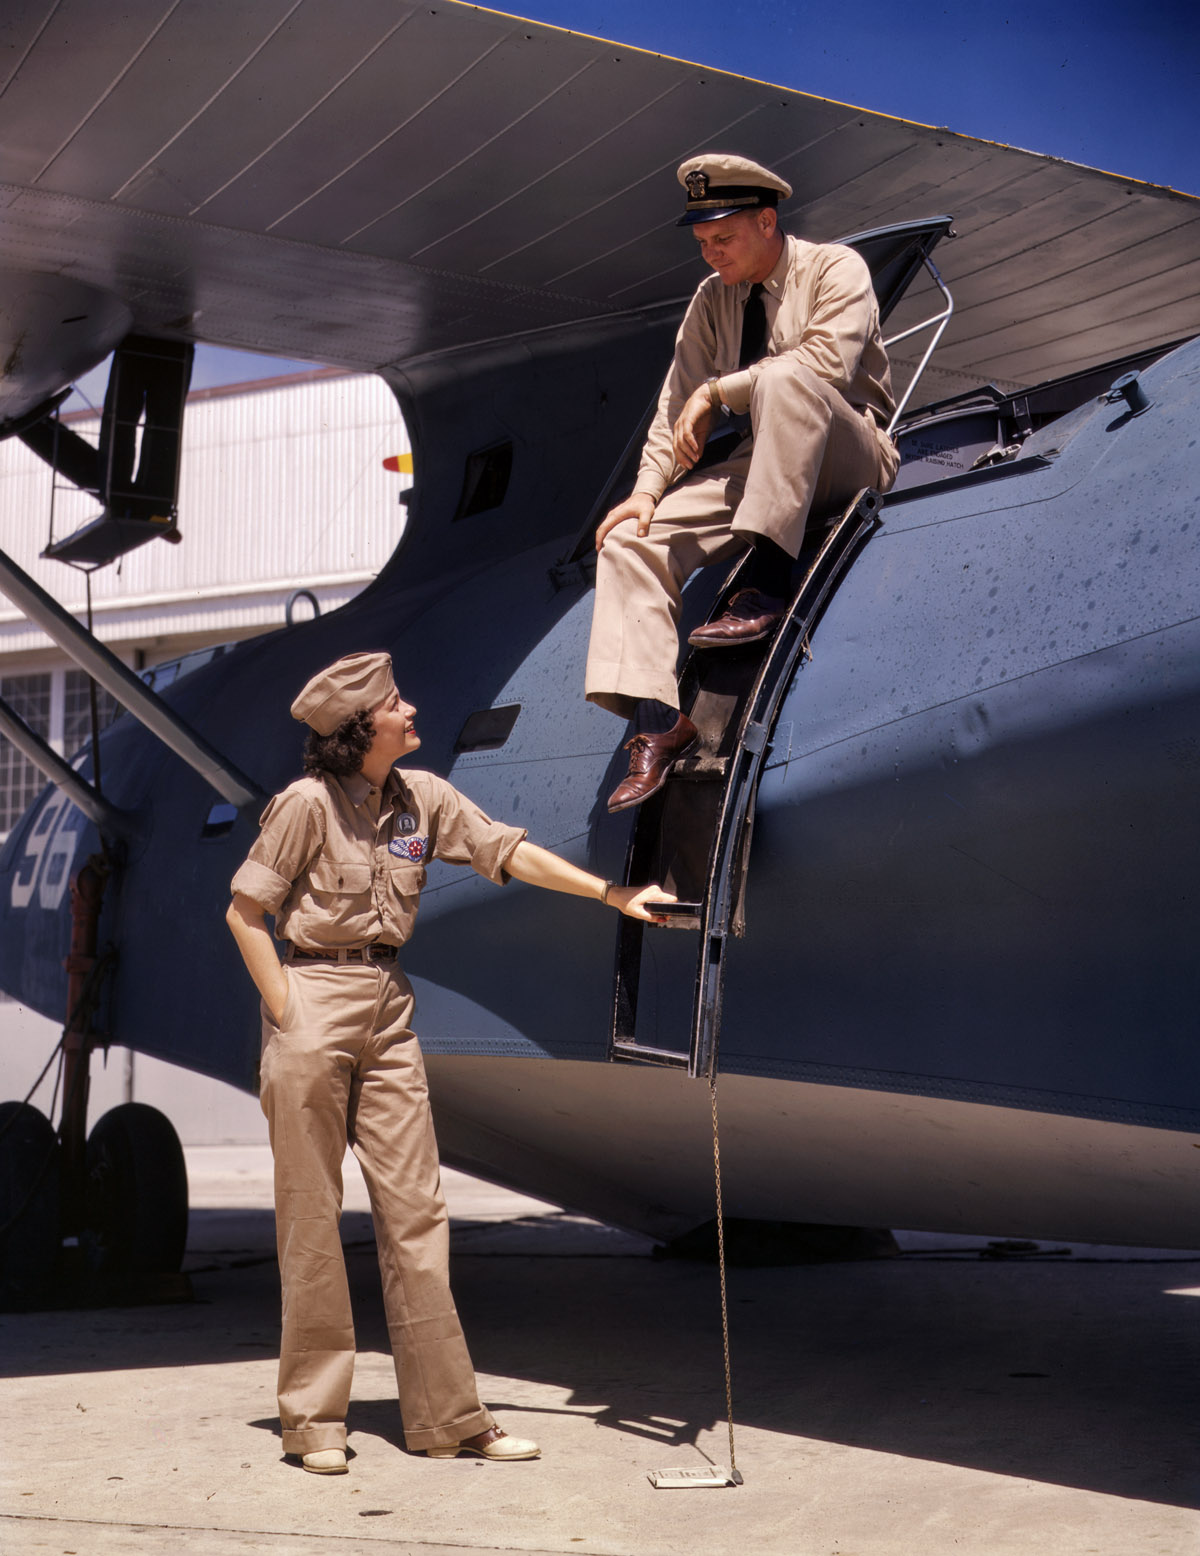 August 1942. Corpus Christi, Texas. "Mrs. Eloise J. Ellis, senior supervisor in the Assembly and Repairs Department of the Naval Air Base, talking with one of the men." 4x5 Kodachrome transparency by Howard Hollem. View full size.